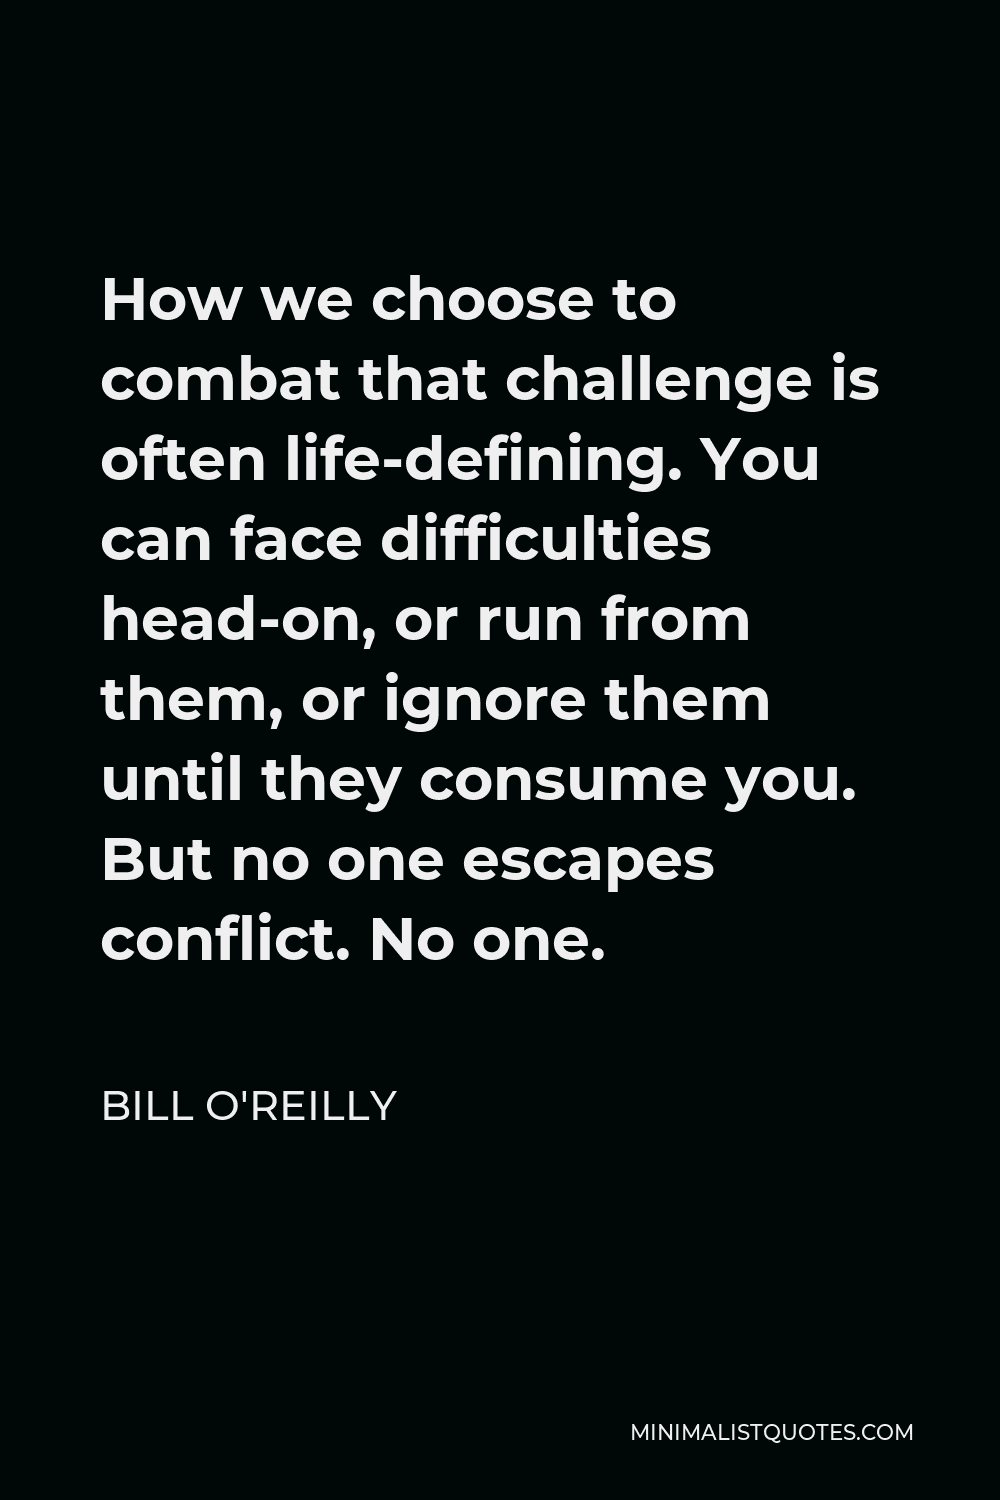 Bill O'Reilly Quote - How we choose to combat that challenge is often life-defining. You can face difficulties head-on, or run from them, or ignore them until they consume you. But no one escapes conflict. No one.